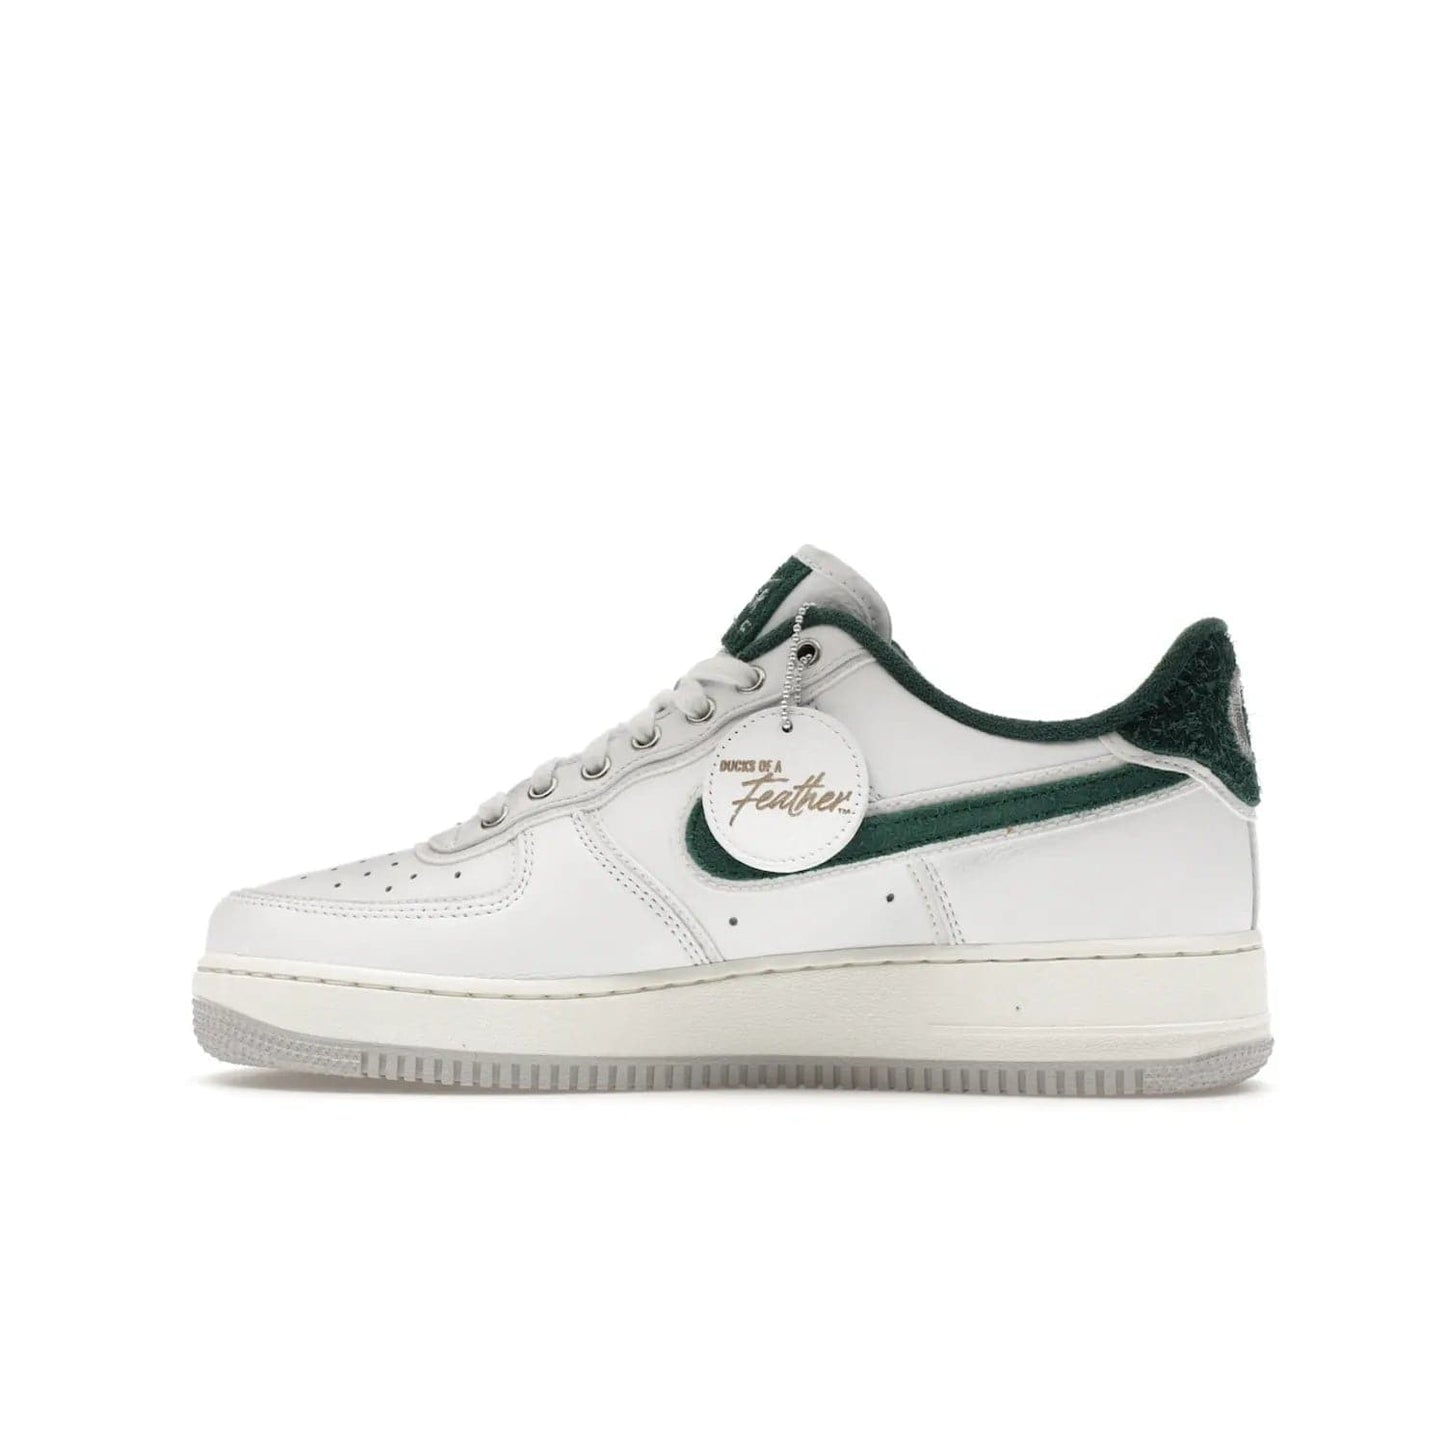 Nike Air Force 1 Low '07 Premium University of Oregon PE - Image 20 - Only at www.BallersClubKickz.com - The Nike Air Force 1 Low '07 Premium. Special Oregon University colorway. White base with green and sail accents. Cushioned rubber midsole. Comfort and style. Support your school!